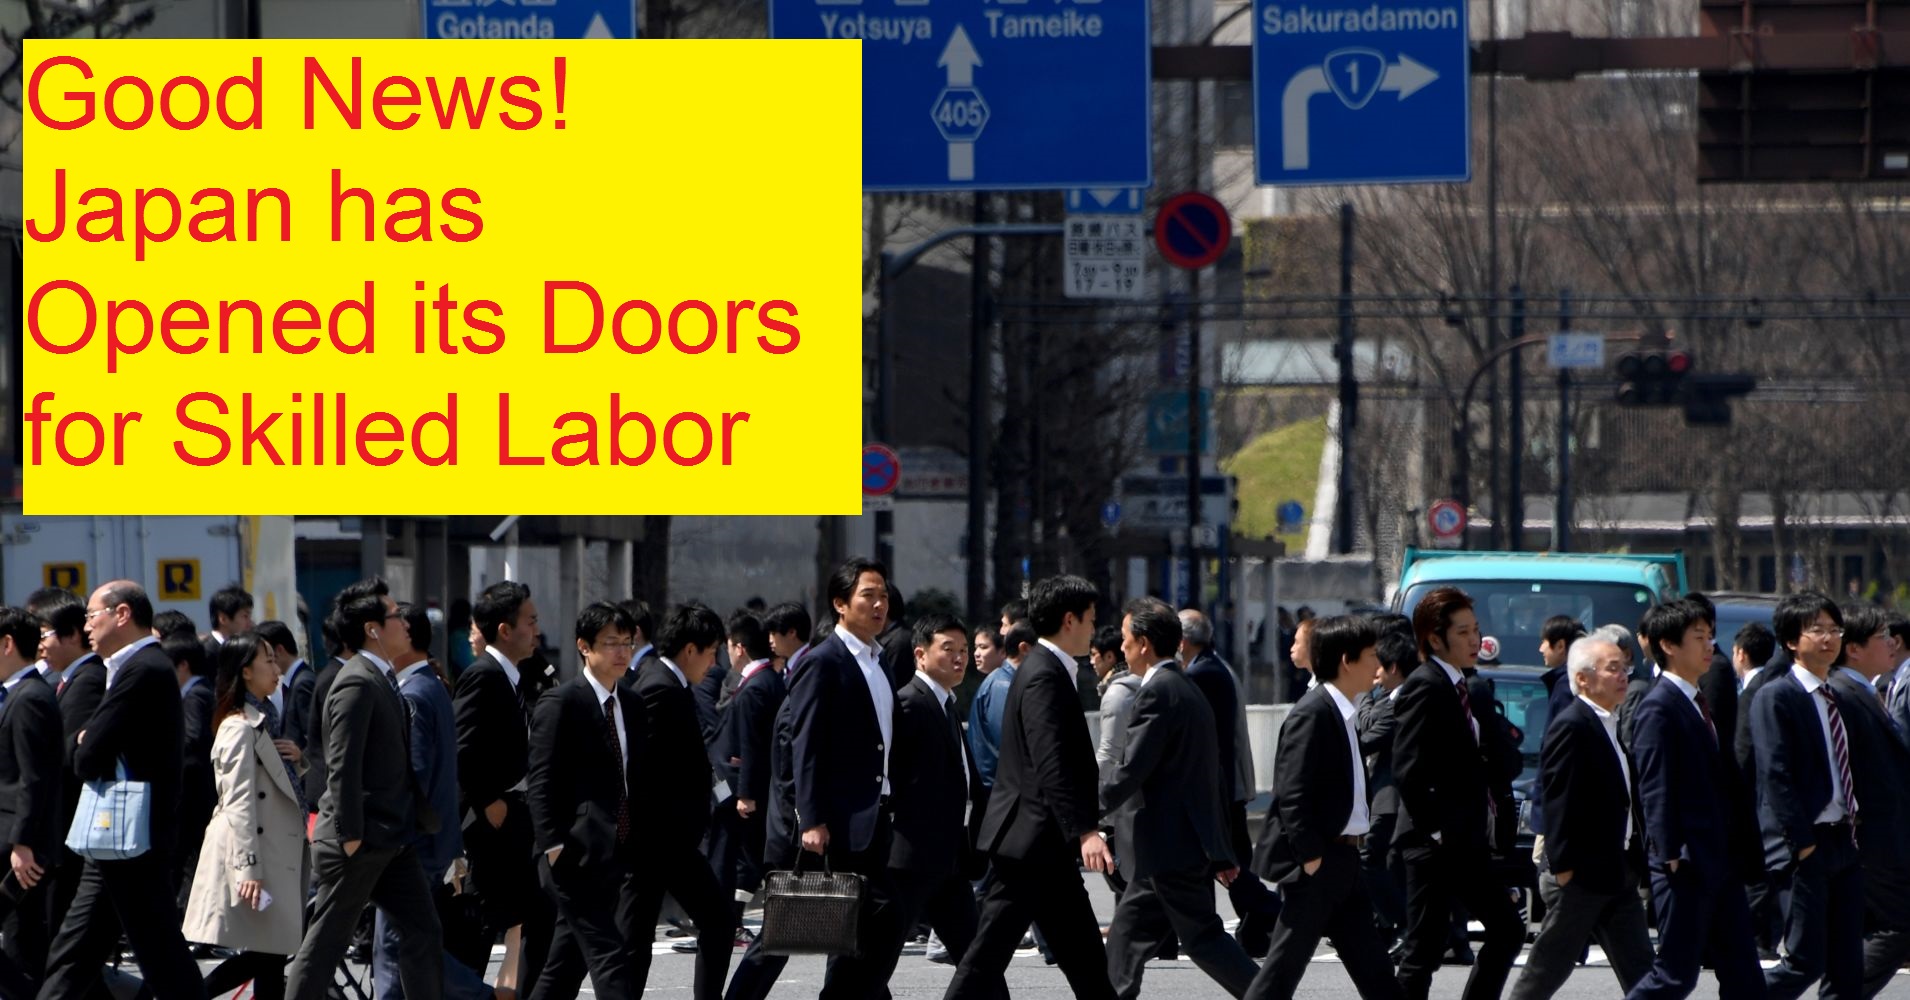 Labor Crisis in Japan - A lookout for an immigrant